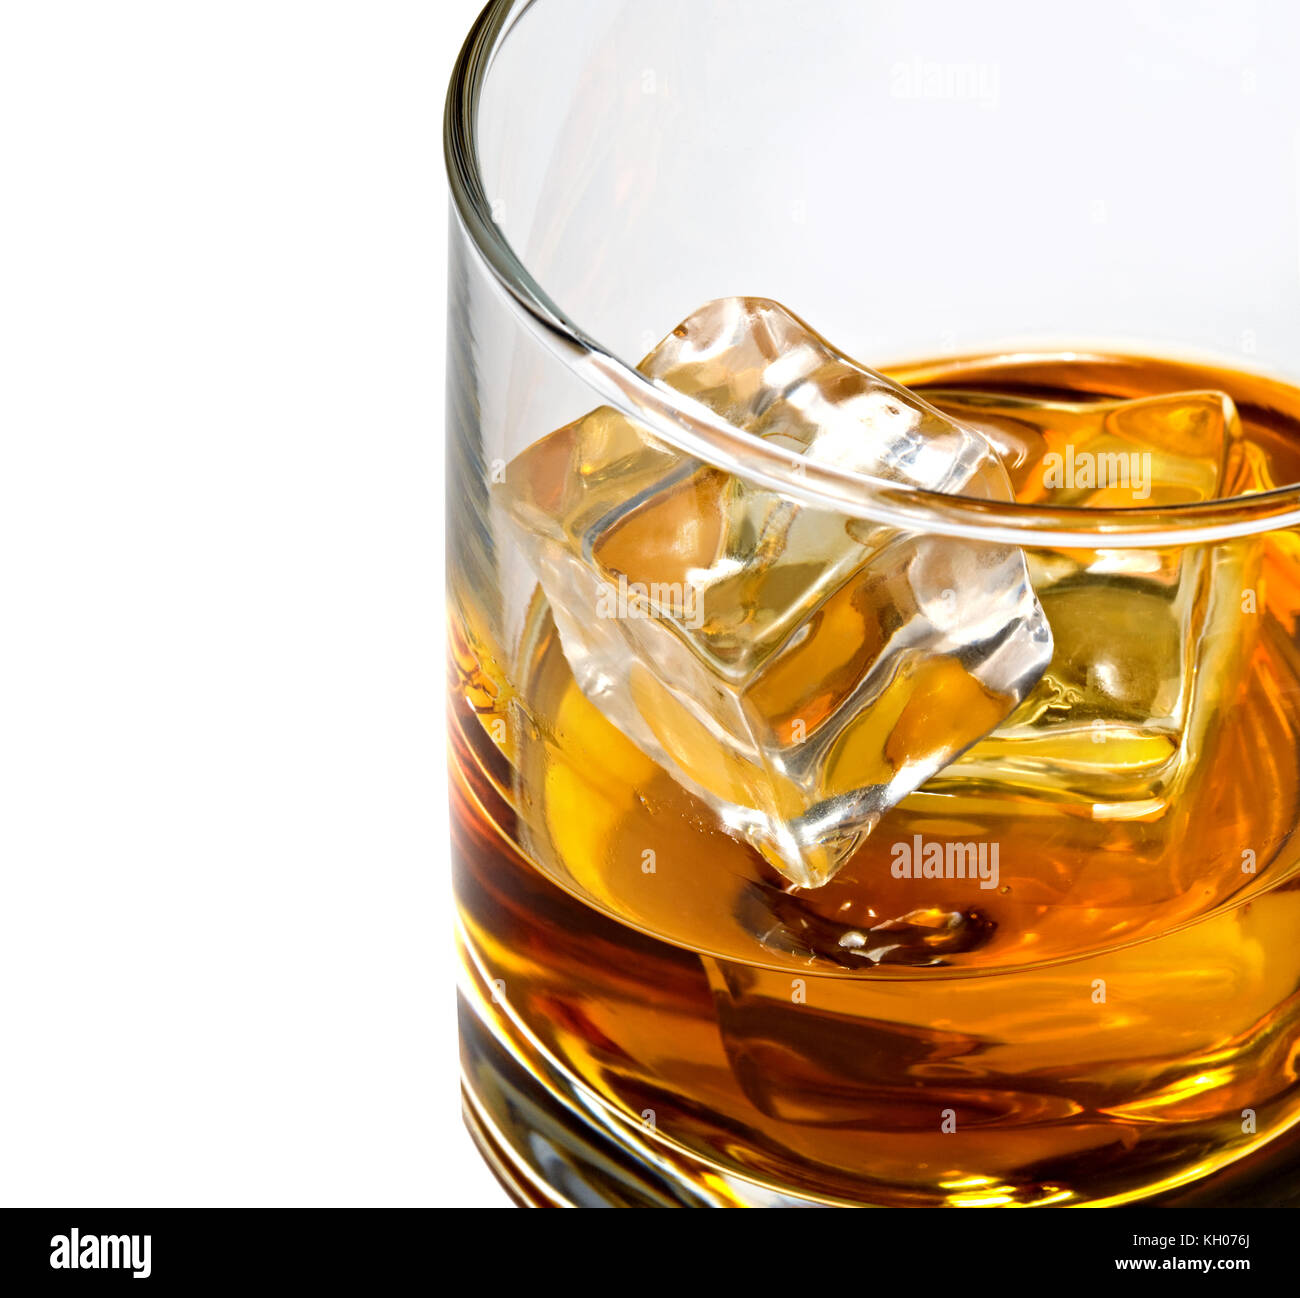 glass of bourbon whisky with ice on the rocks Stock Photo - Alamy